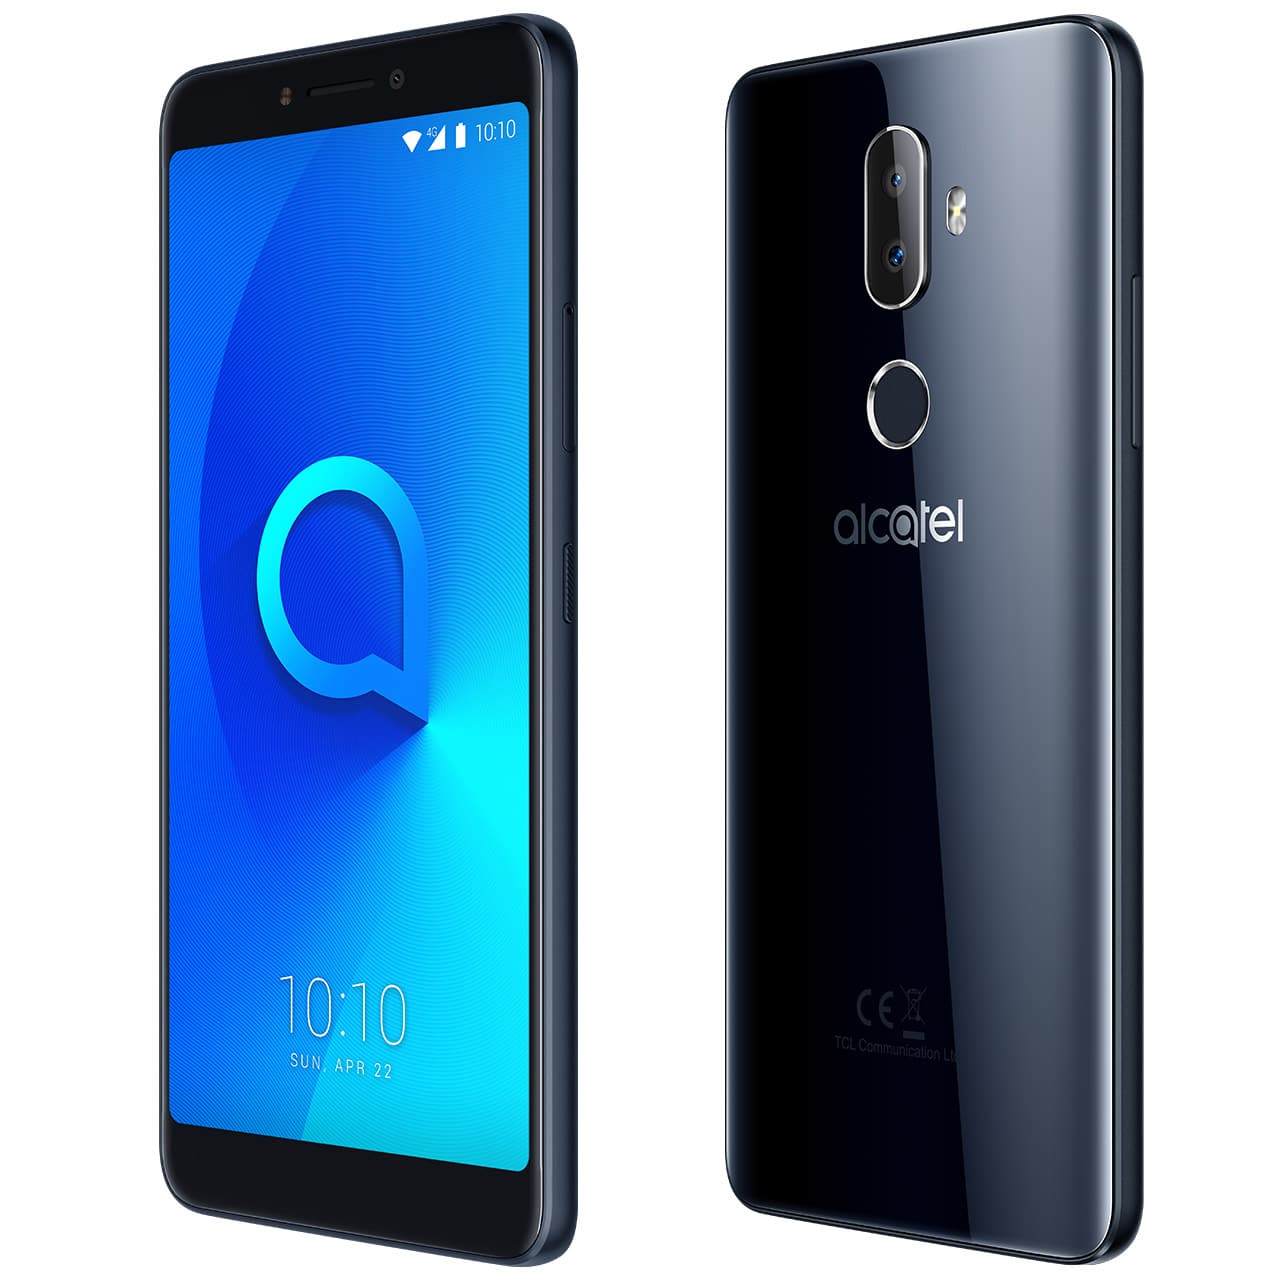 Alcatel 3 Android 4G Smartphone Full Specification